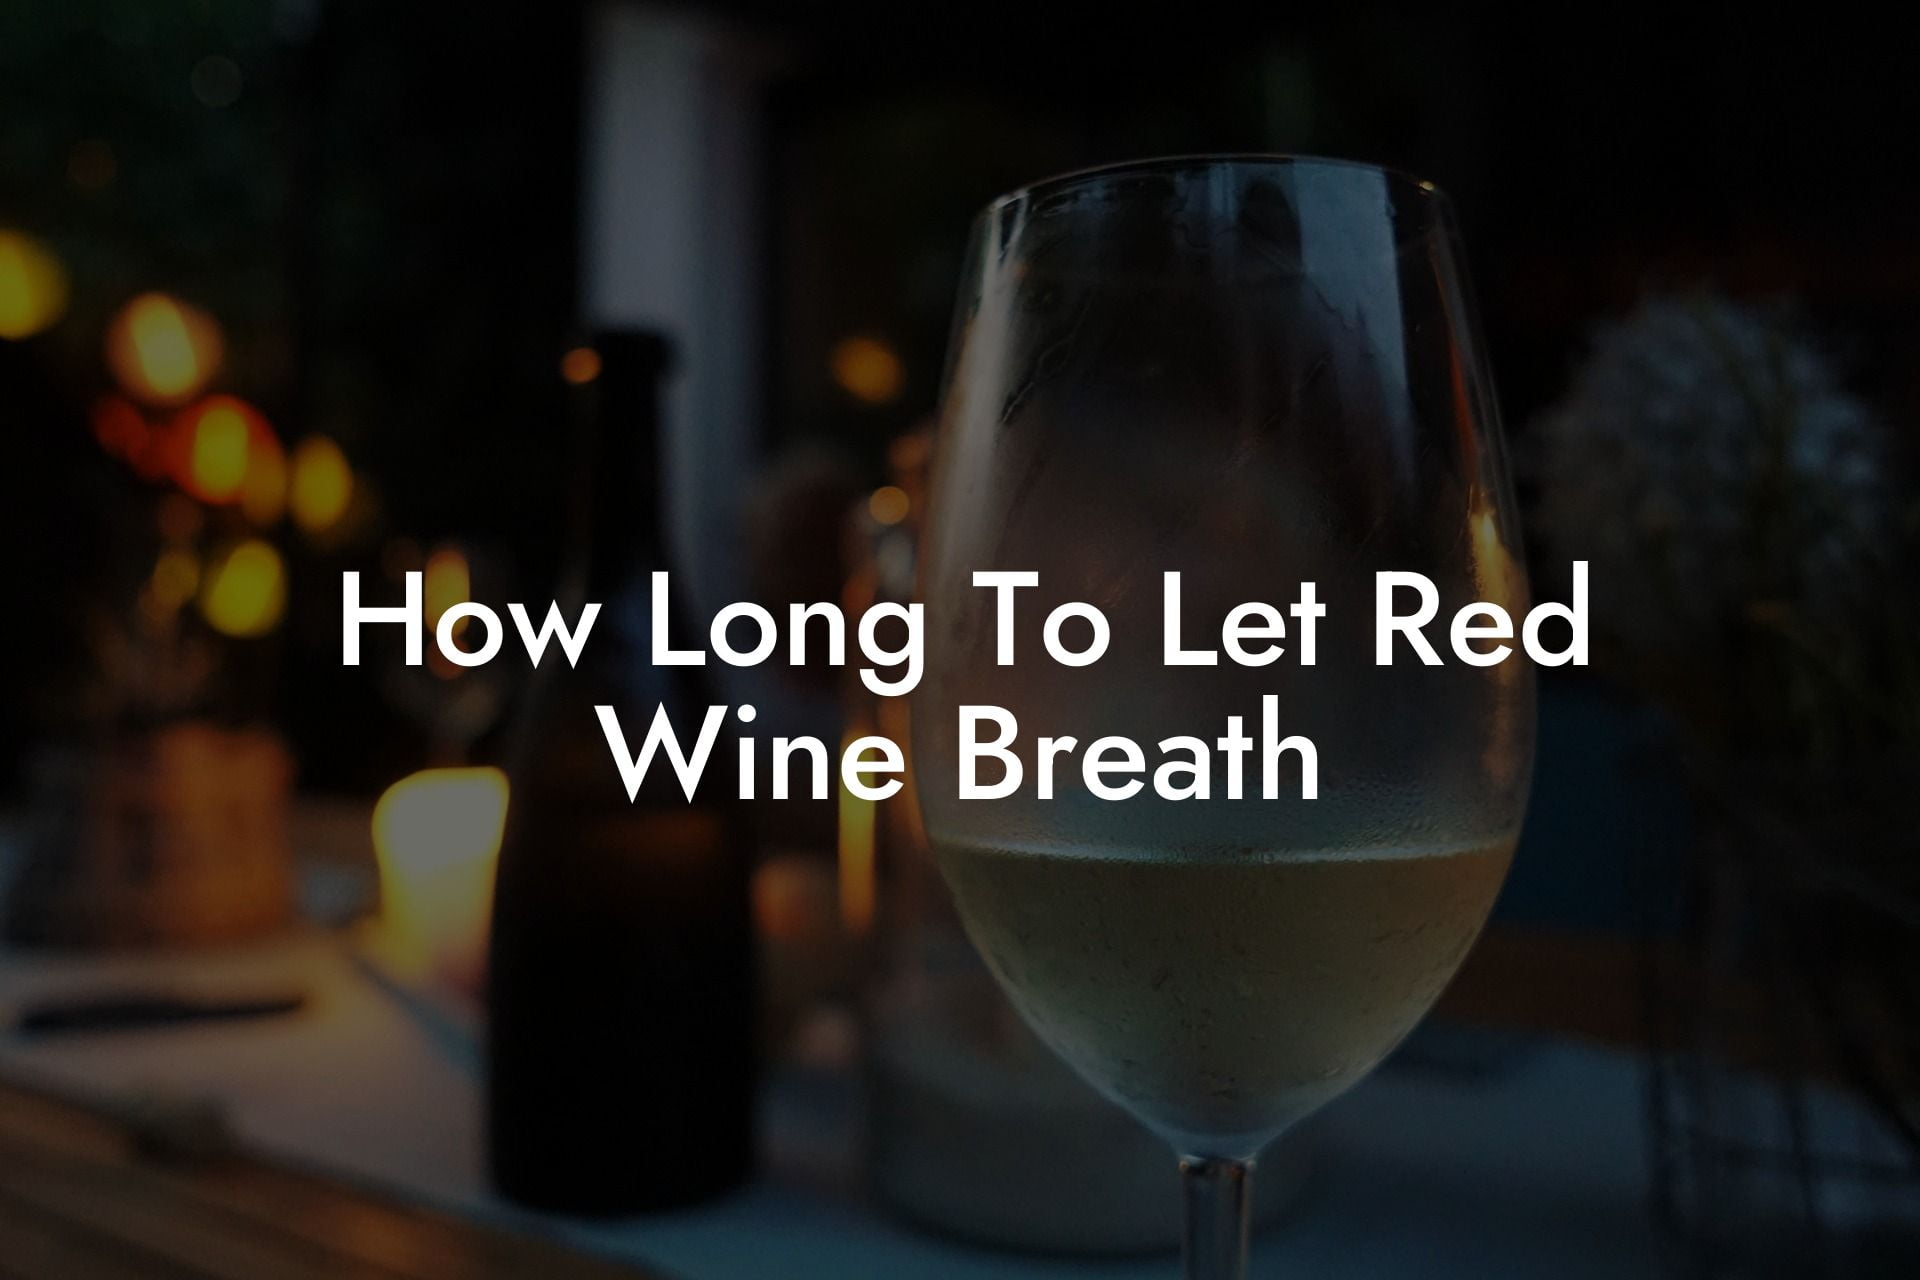 How Long To Let Red Wine Breath